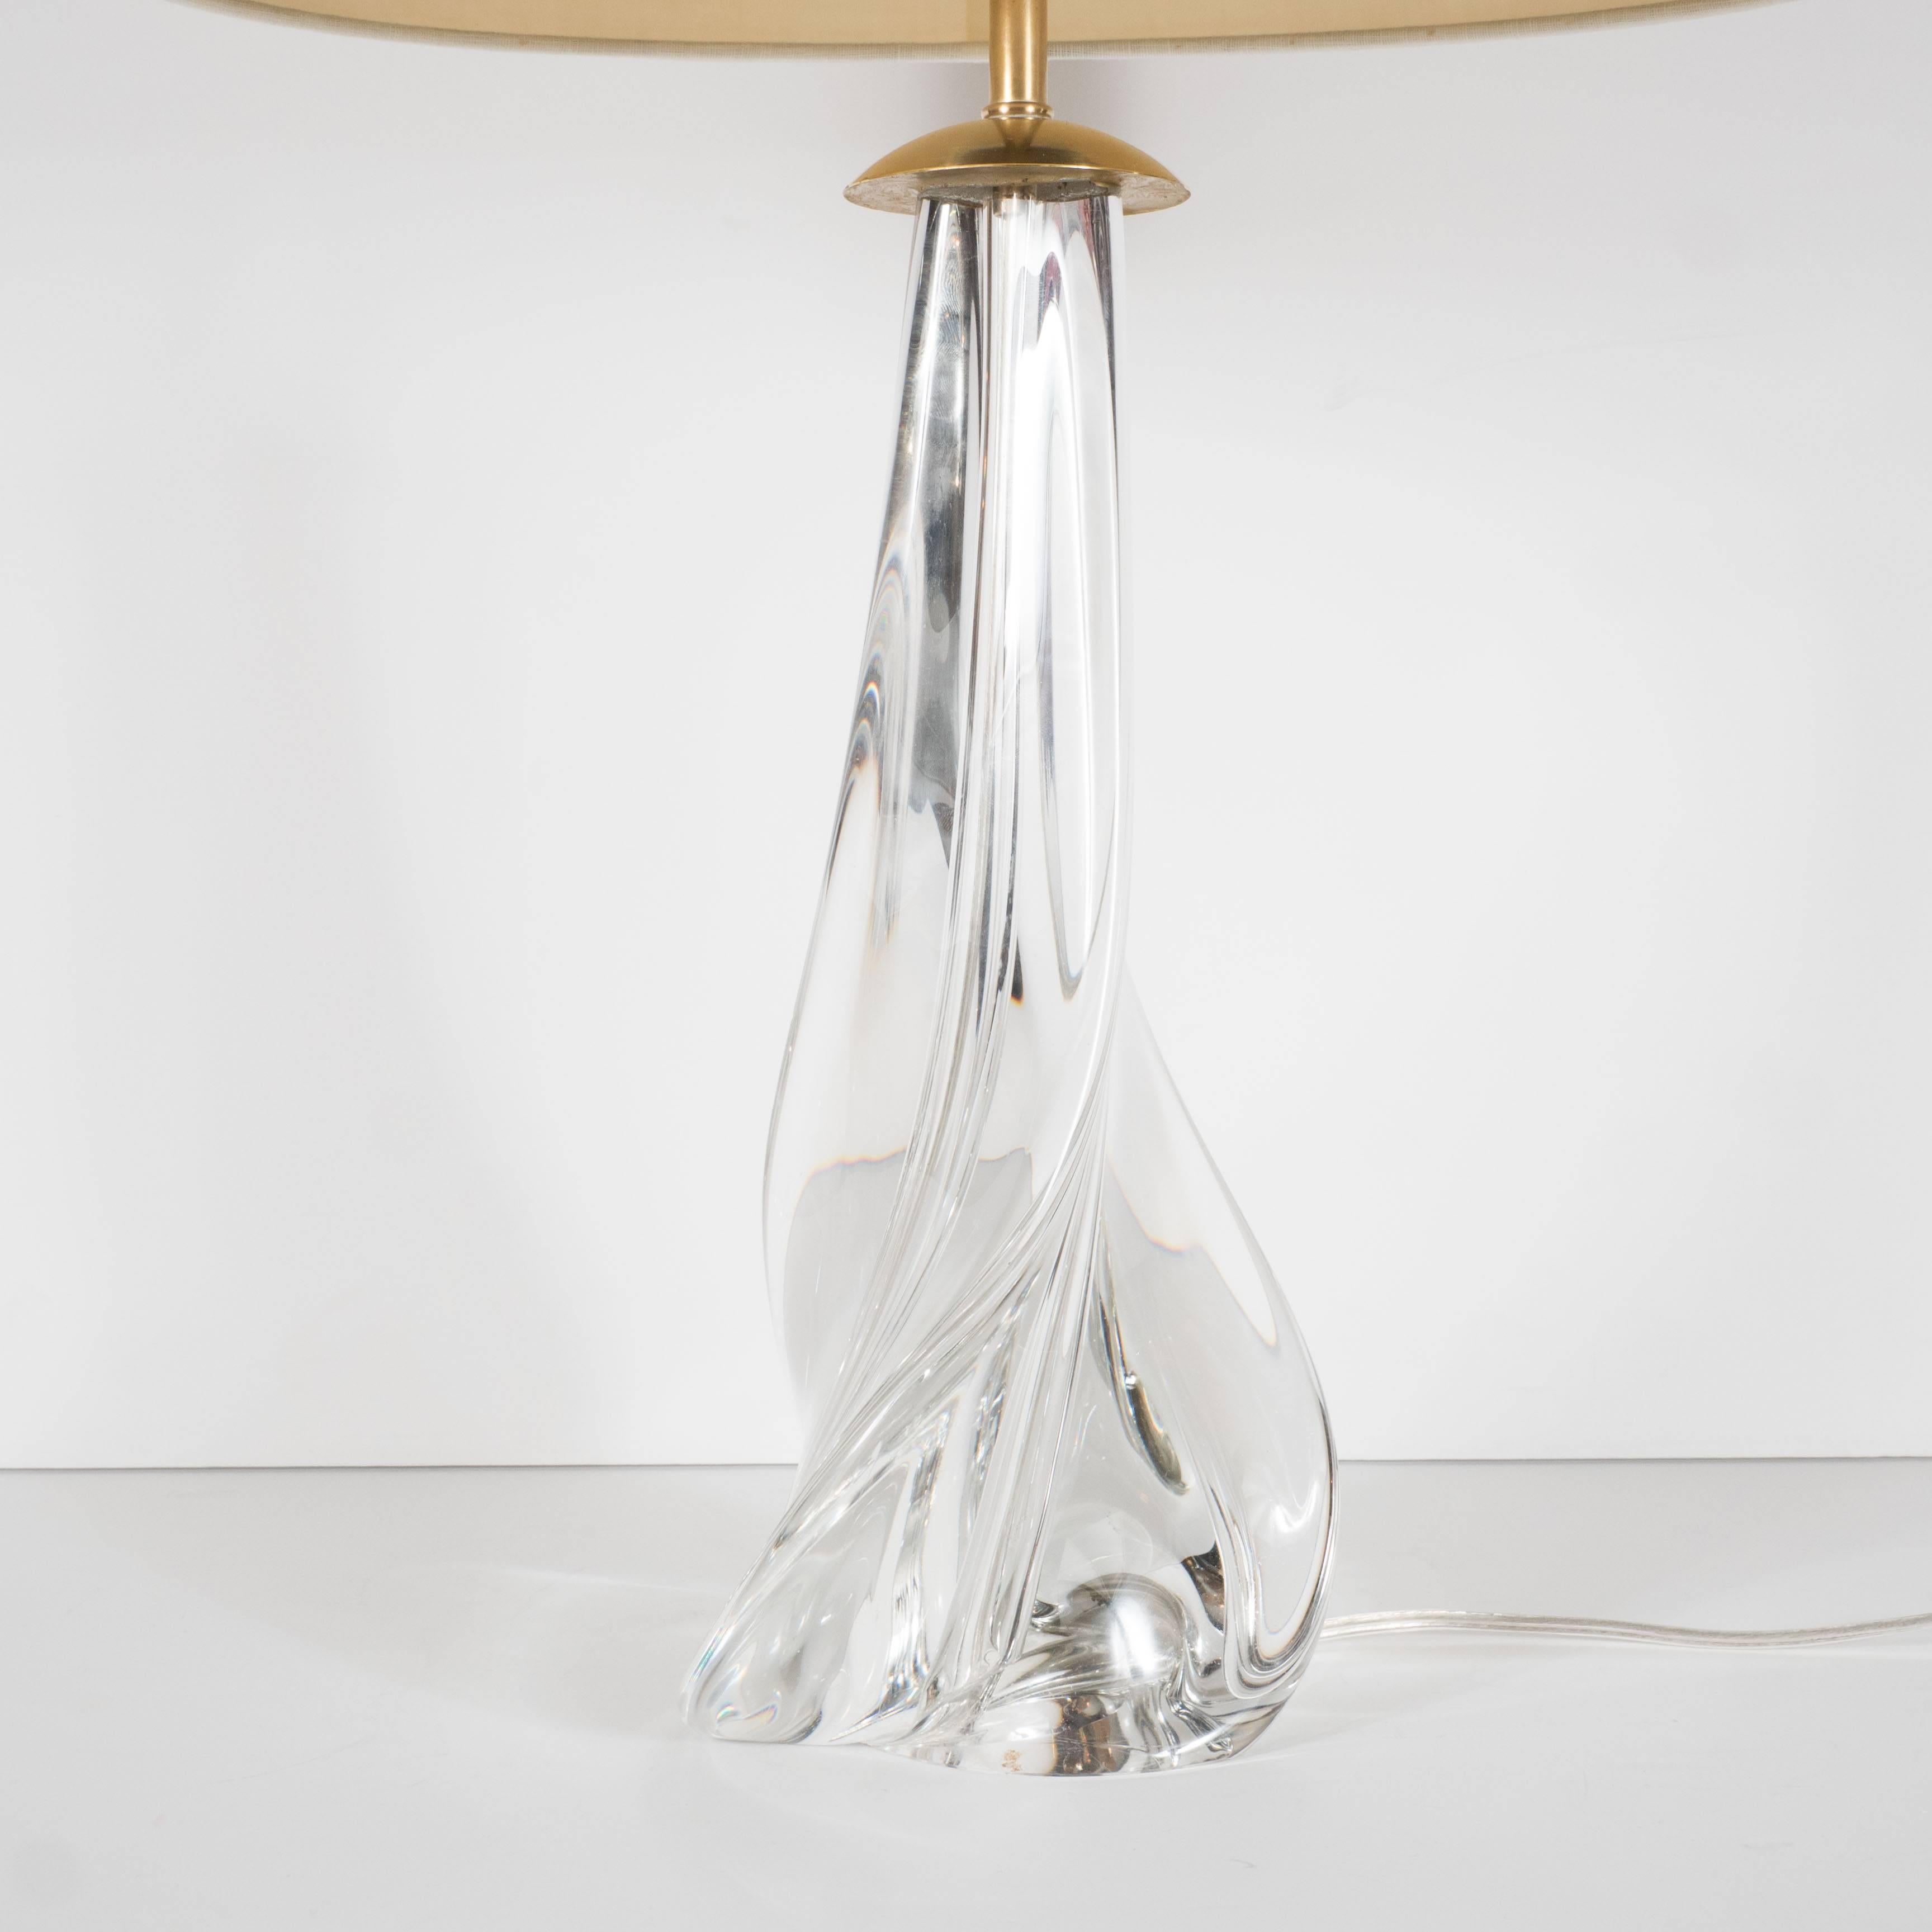 A crystal swirl-form table or desk lamp by St. Louis. A single piece of handblown crystal with a curved swirl-like form is topped by a polished brass dome-cap. A custom, oval linen shade covers two standard candelabra-based sockets. A domed,